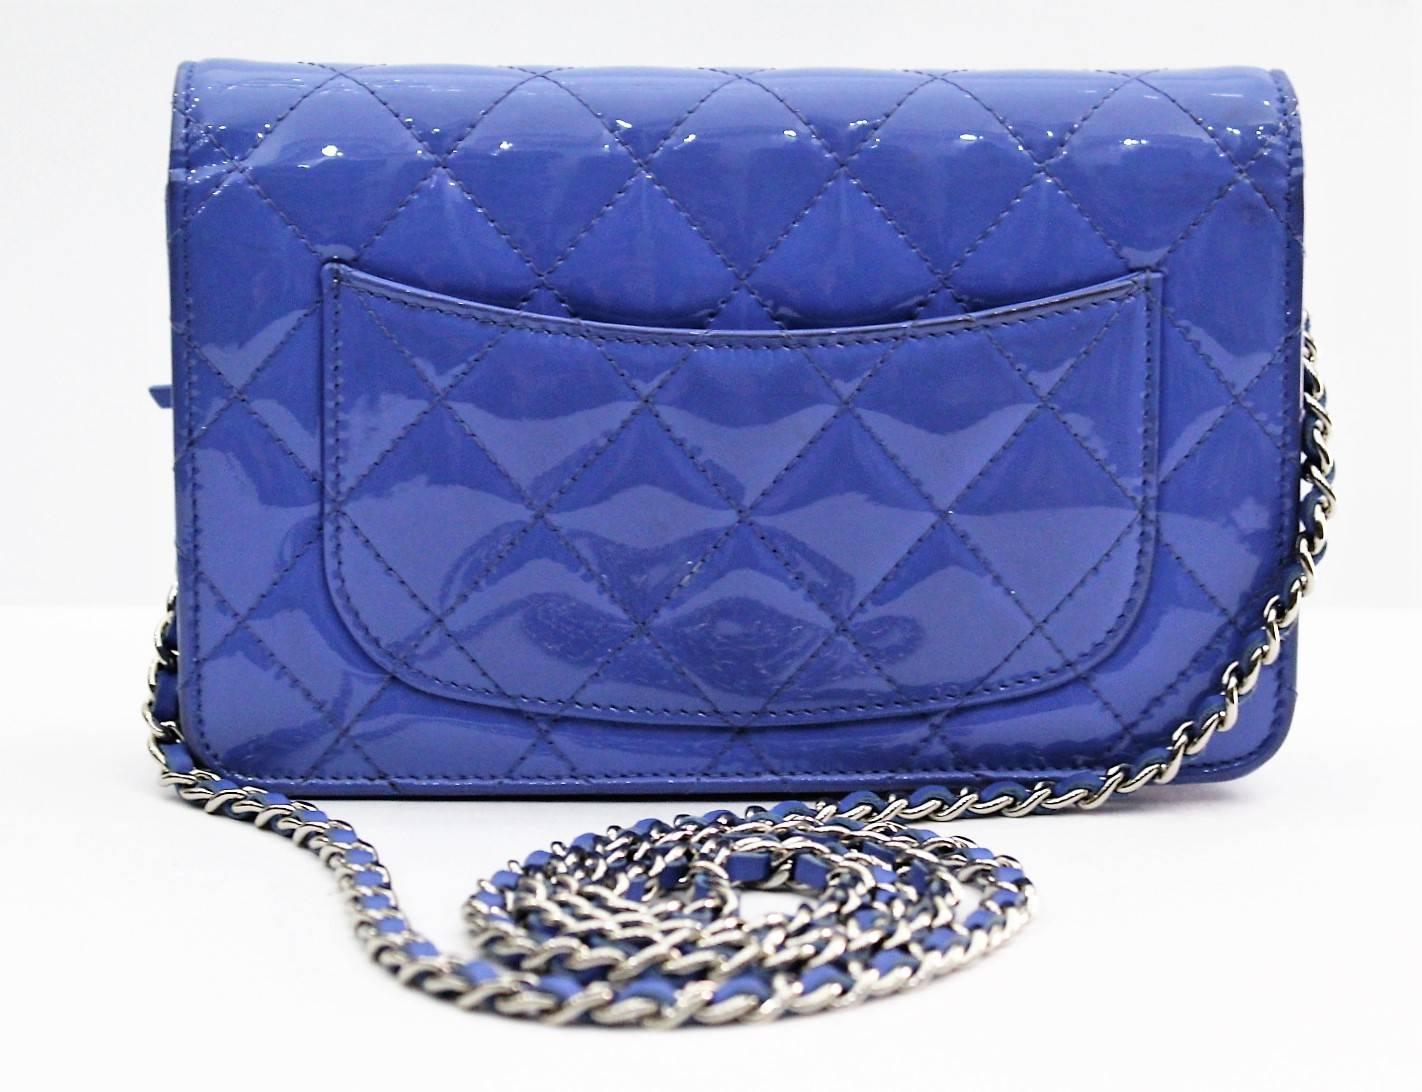 Gorgeous Chanel Lilac Quilted Patent Leather Wallet-on-Chain Clutch Bag. It features gorgeous quilted glossy, bright blue patent leather and a small silvertone CC logo on the front. The versatile leather strap chain can be worn cross-body, on the